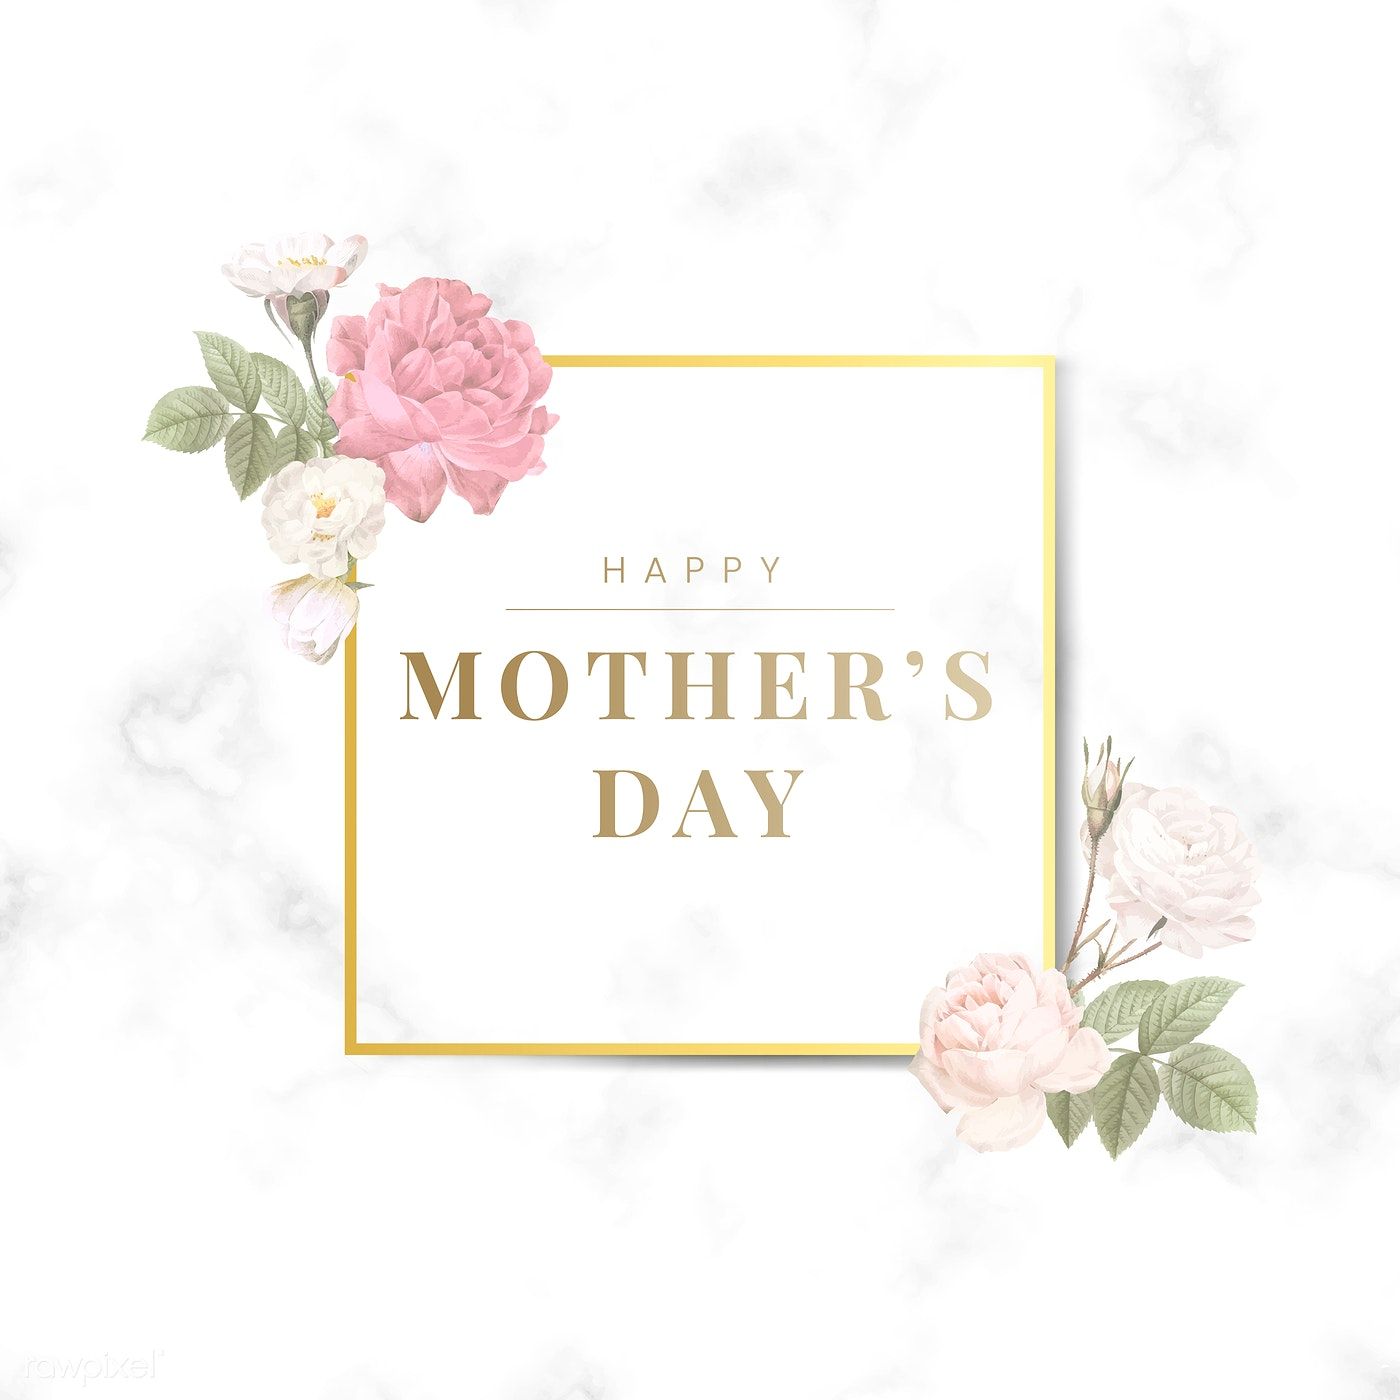 Download premium vector of Happy Mother's Day square badge vector